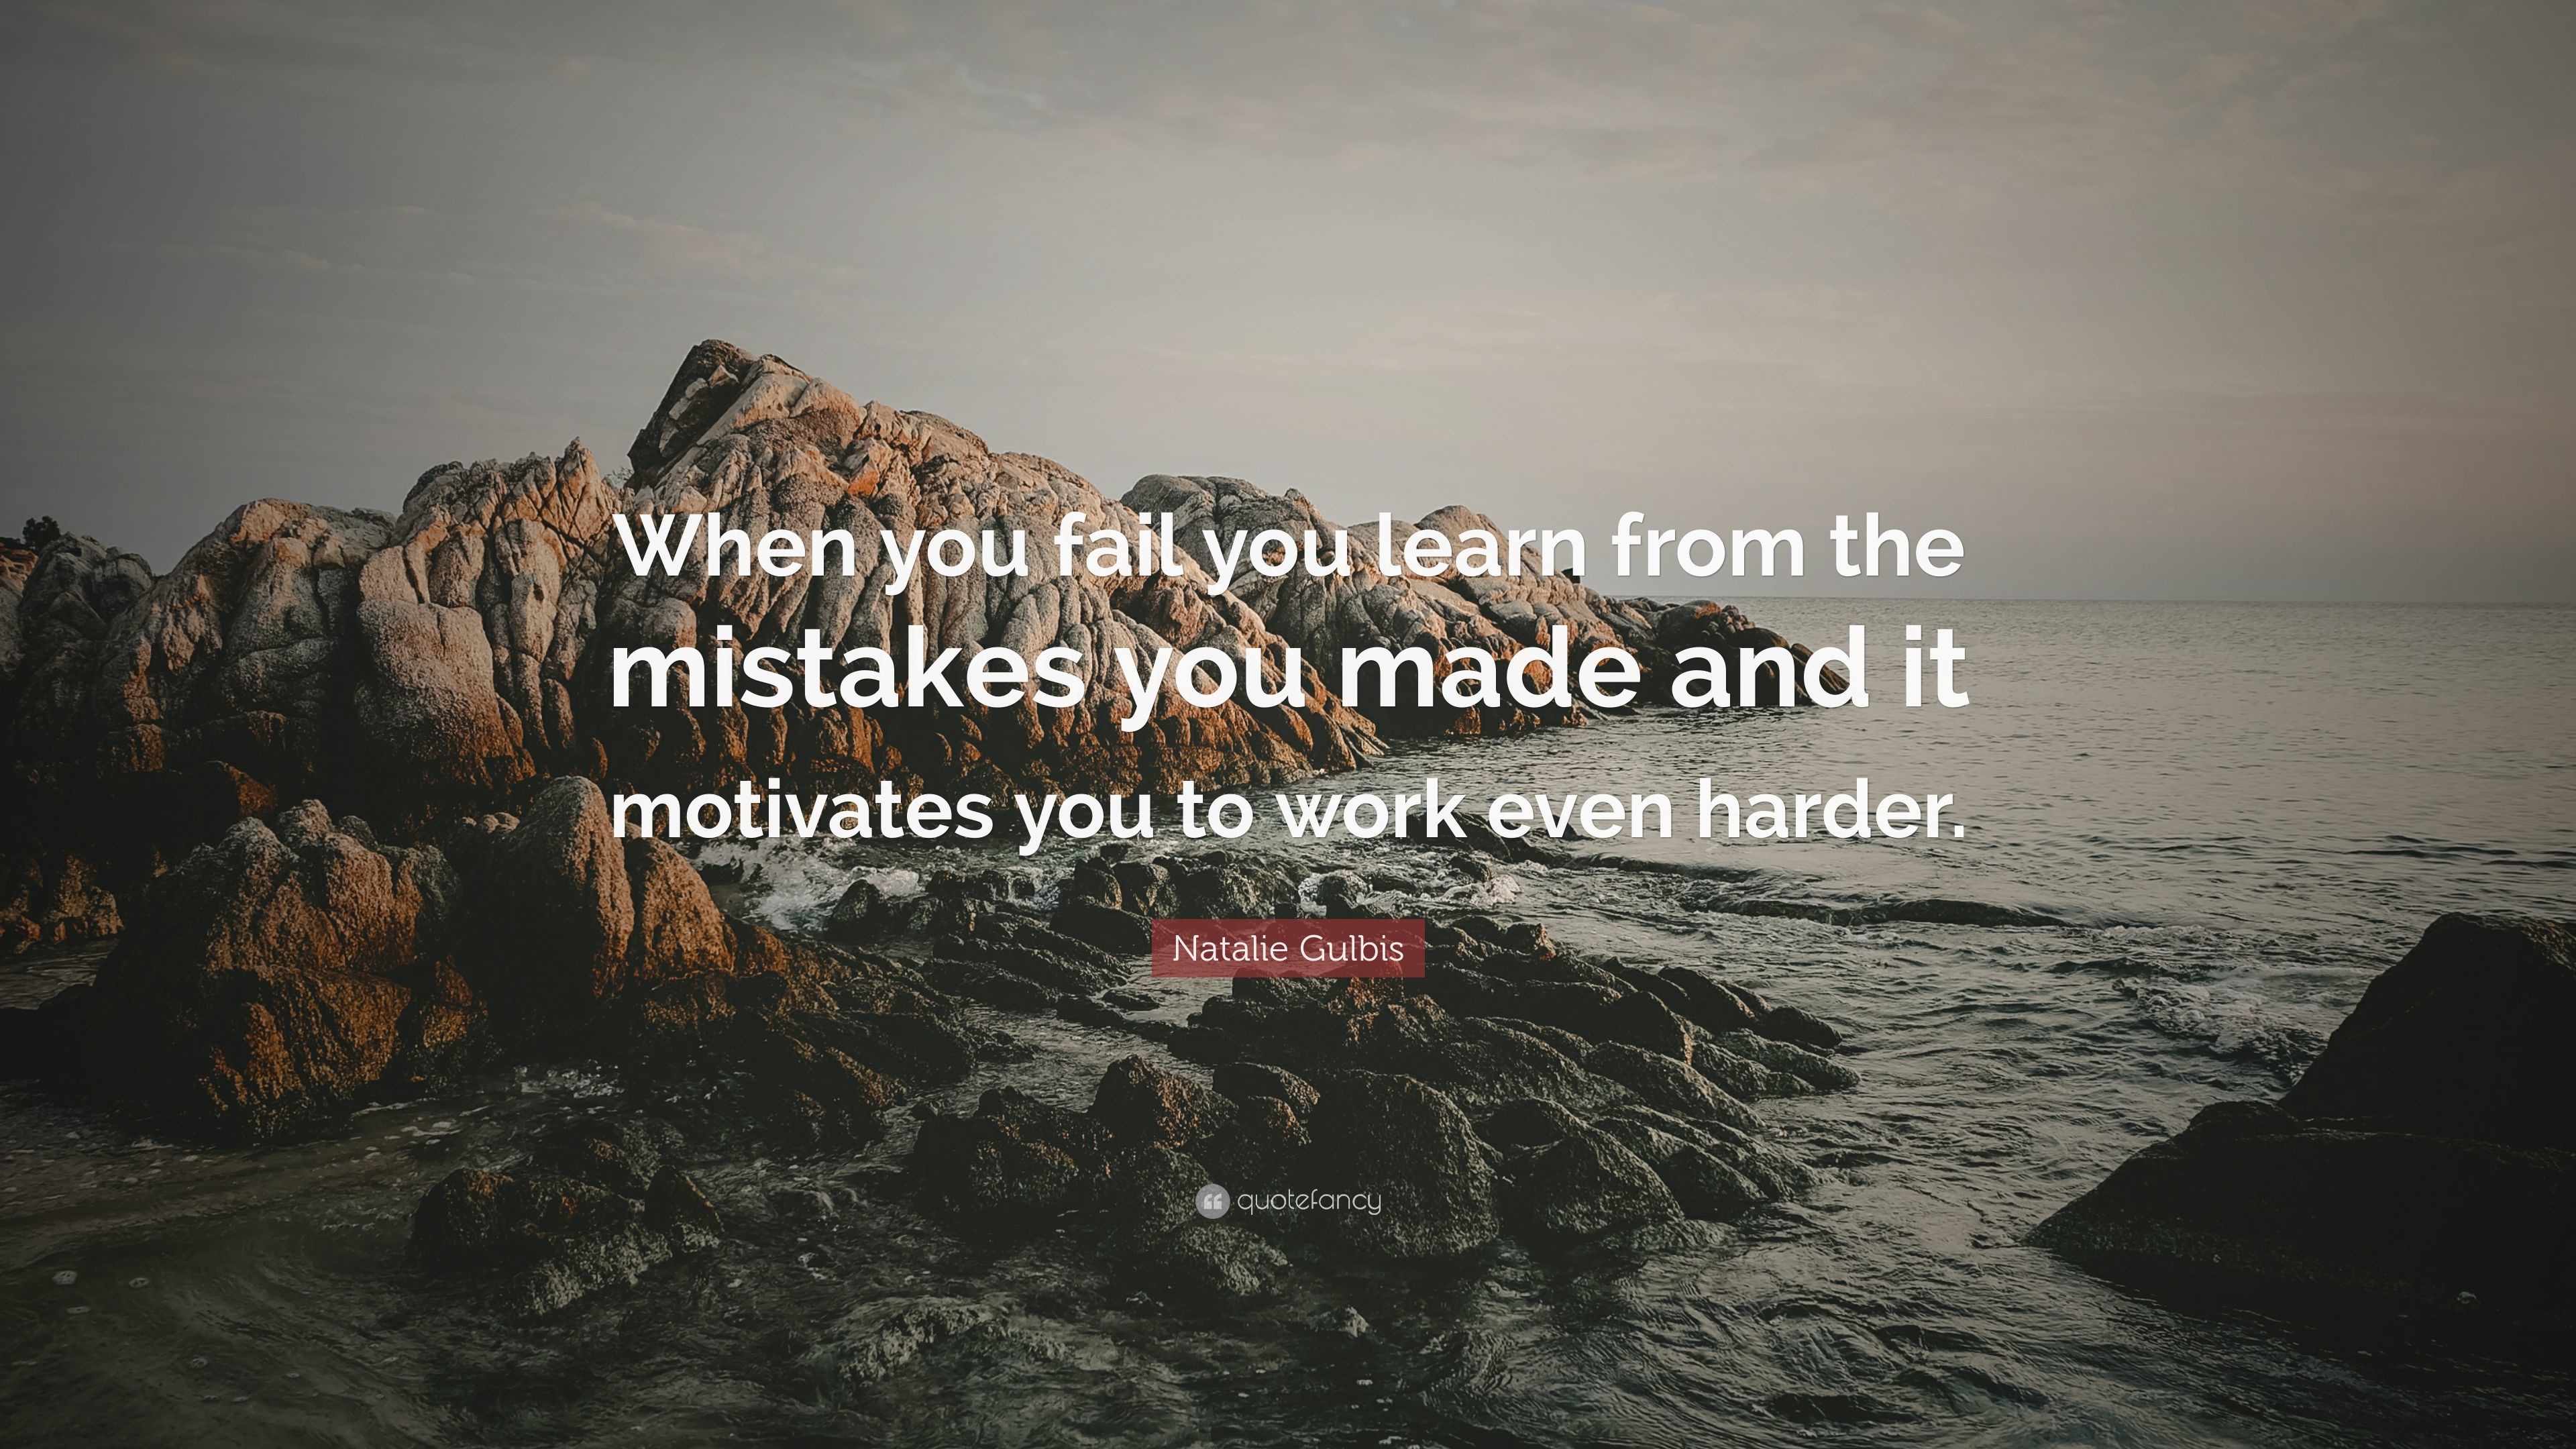 3840x2160 Natalie Gulbis Quote: “When you fail you learn from the mistakes you made  and